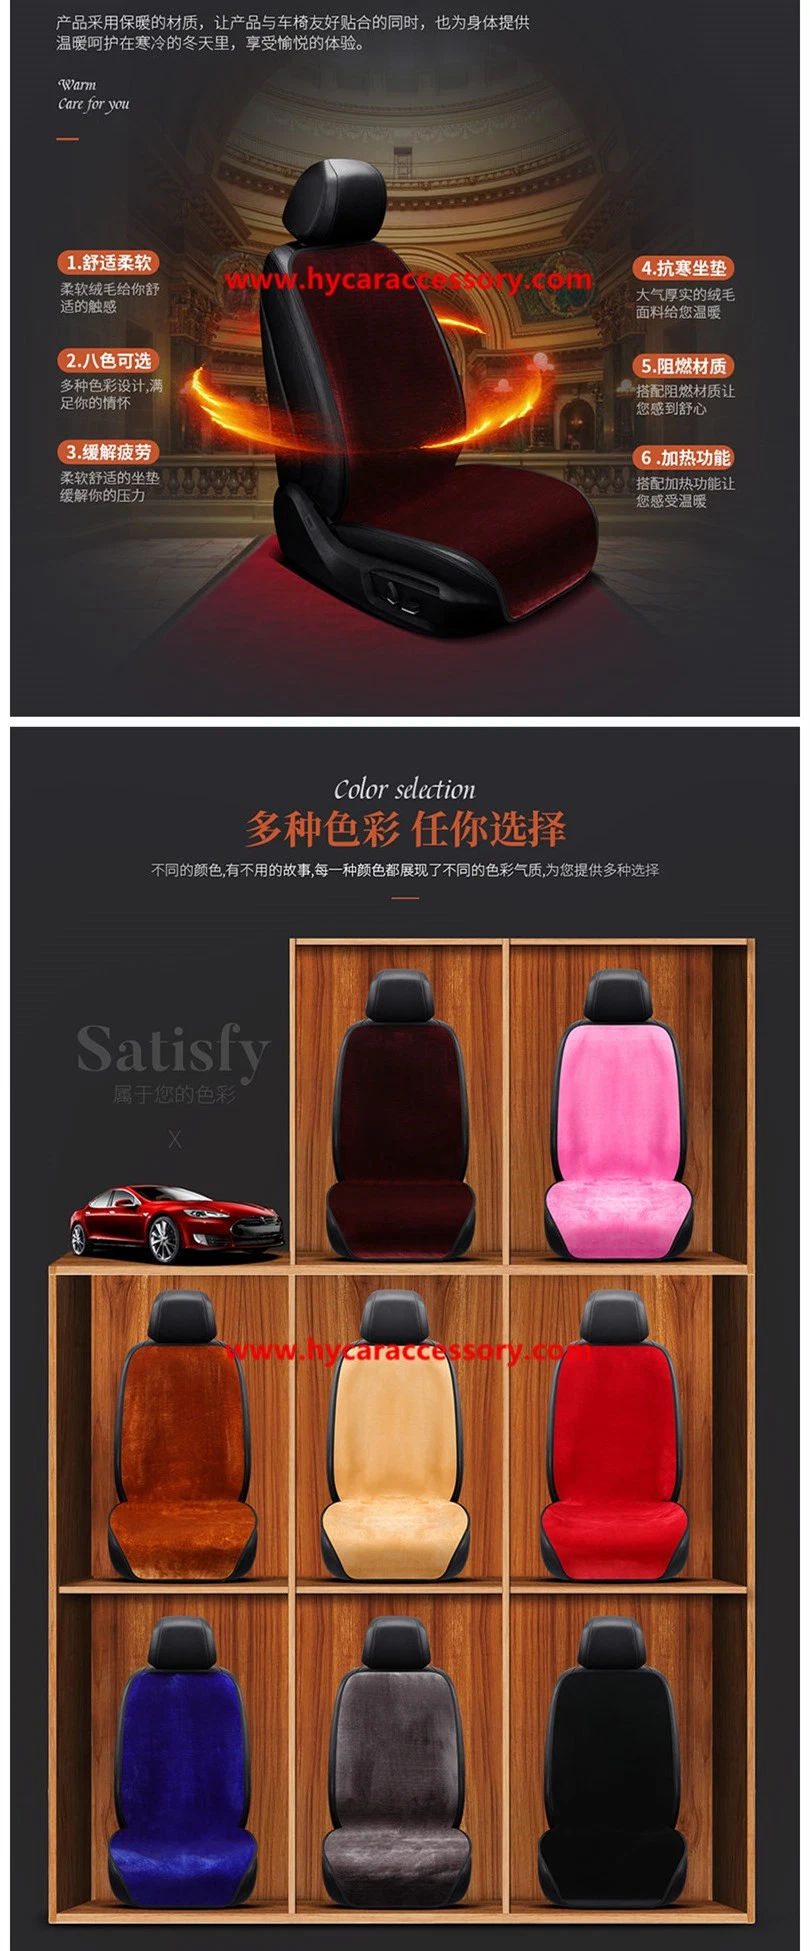 Car Decoration Car Interiorcar Accessory Universal DC 12V Blue Heating Cushion Pad Winter Auto Heated Car Seat Cover for All Vehicle